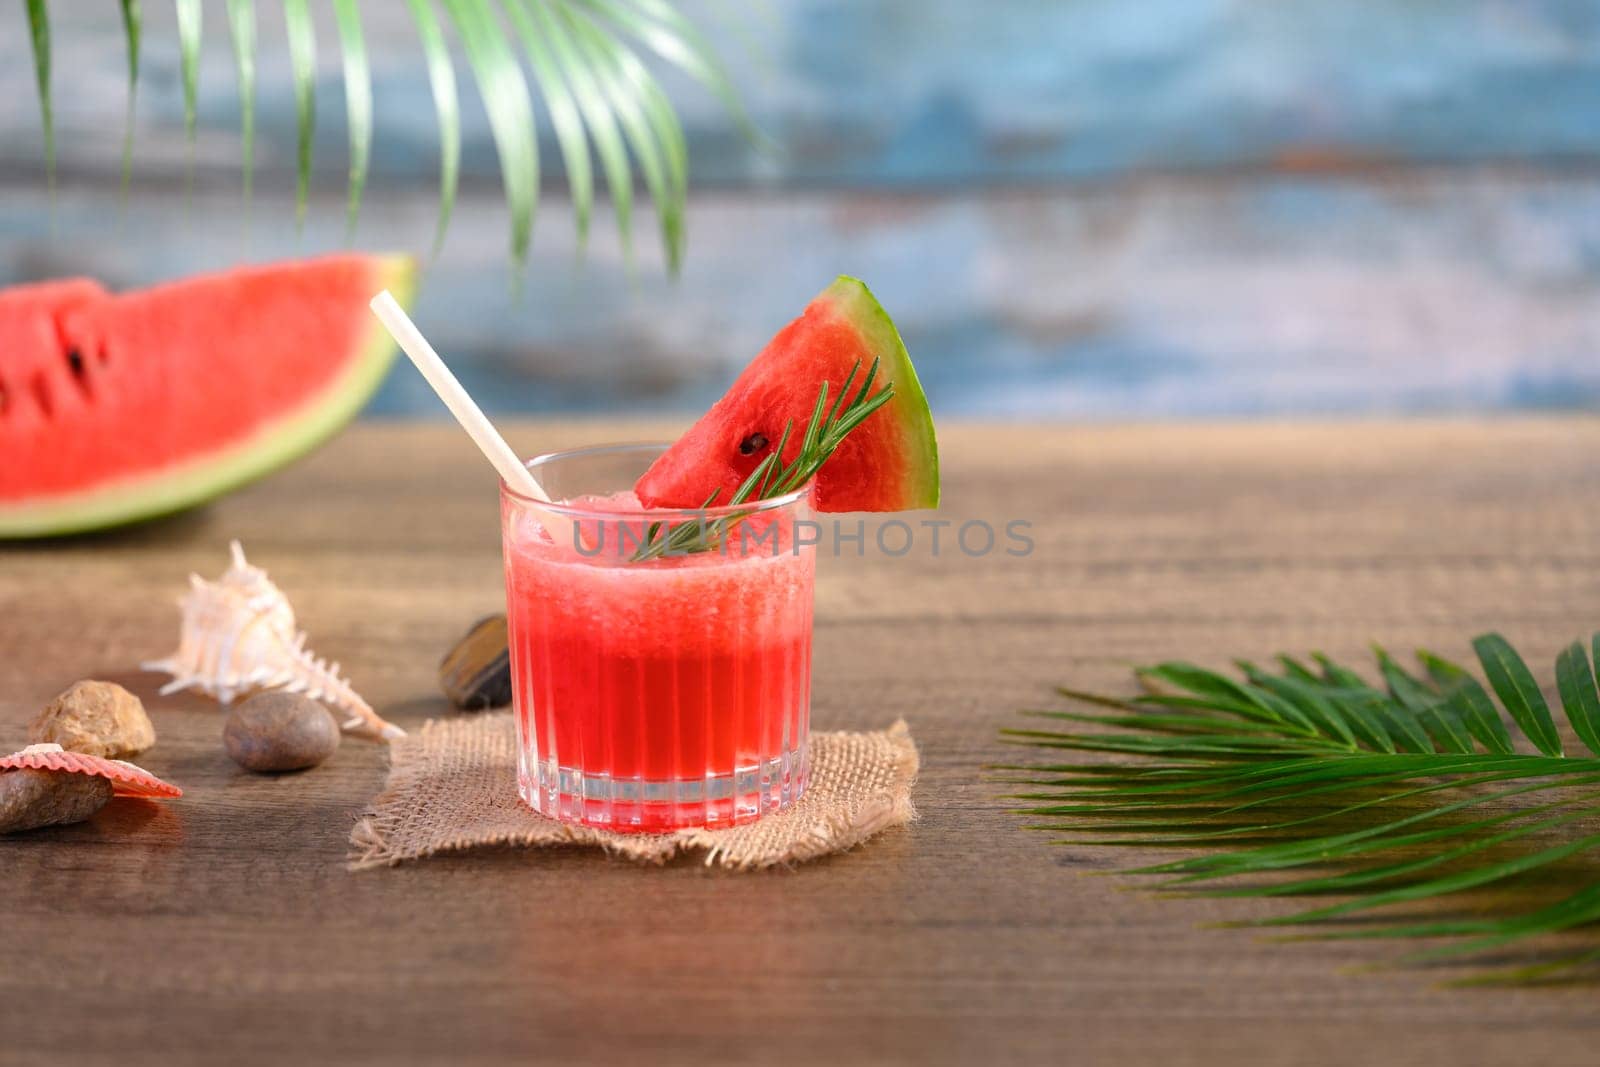 Cold summer fruit drink, fresh watermelon mocktail on wooden table with seashells.